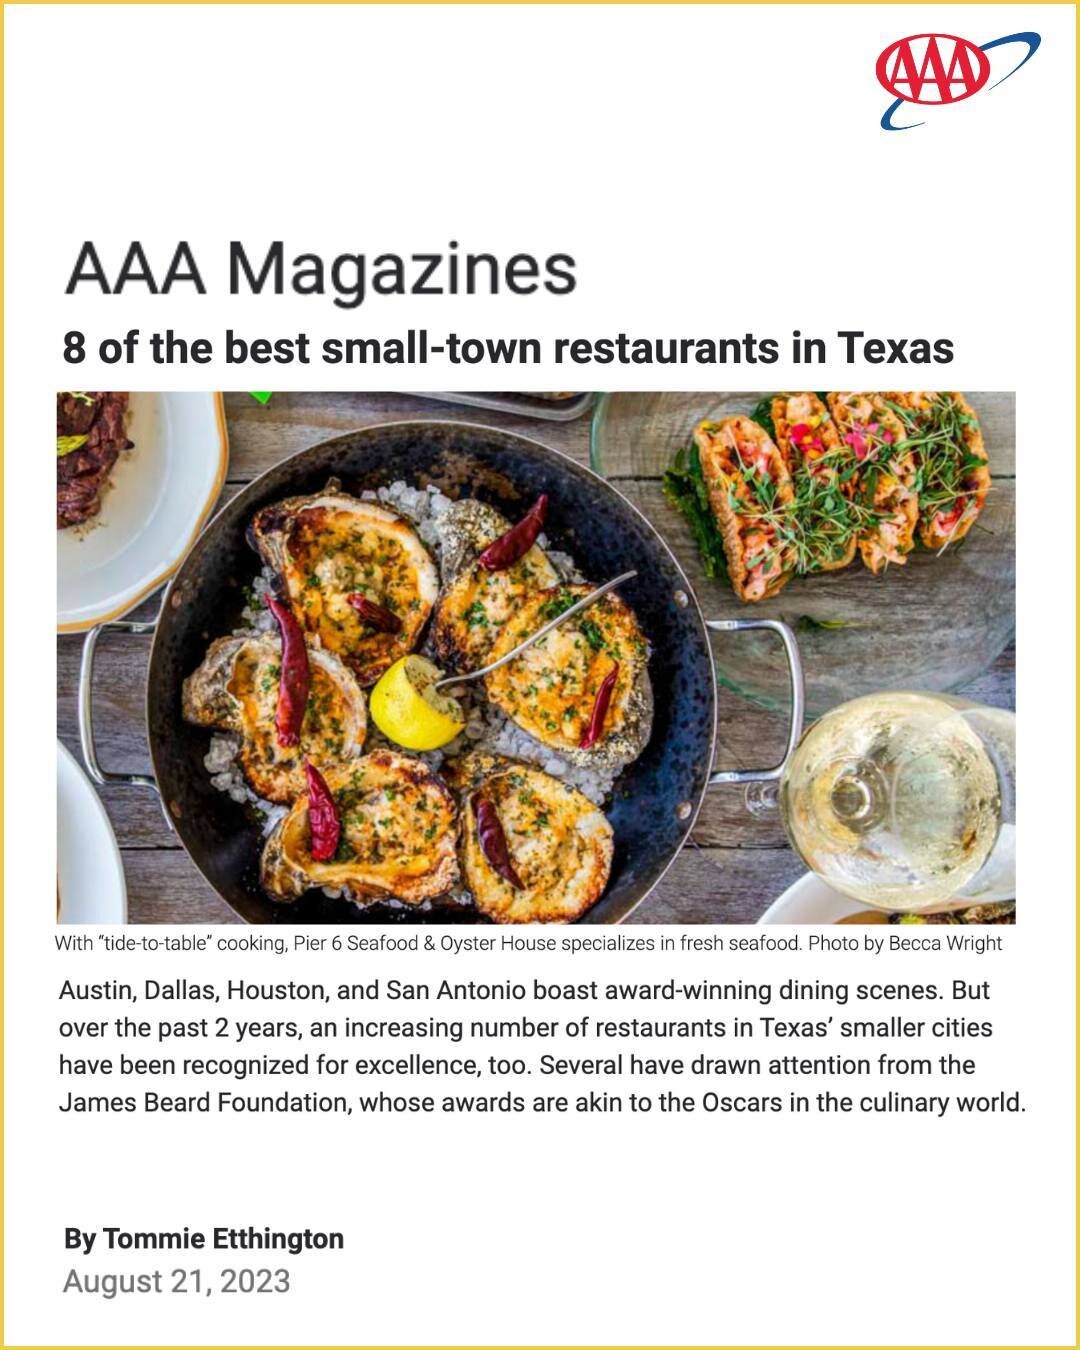 Big congrats to @[17841438098742666:@piersixseafood], named one of the Best Small-Town Restaurants in Texas by AAA Magazine! 🎉🎉🎉 

Located halfway between Houston and Galveston, this James Beard Semifinalist for Best New Restaurant (2022) is a sea